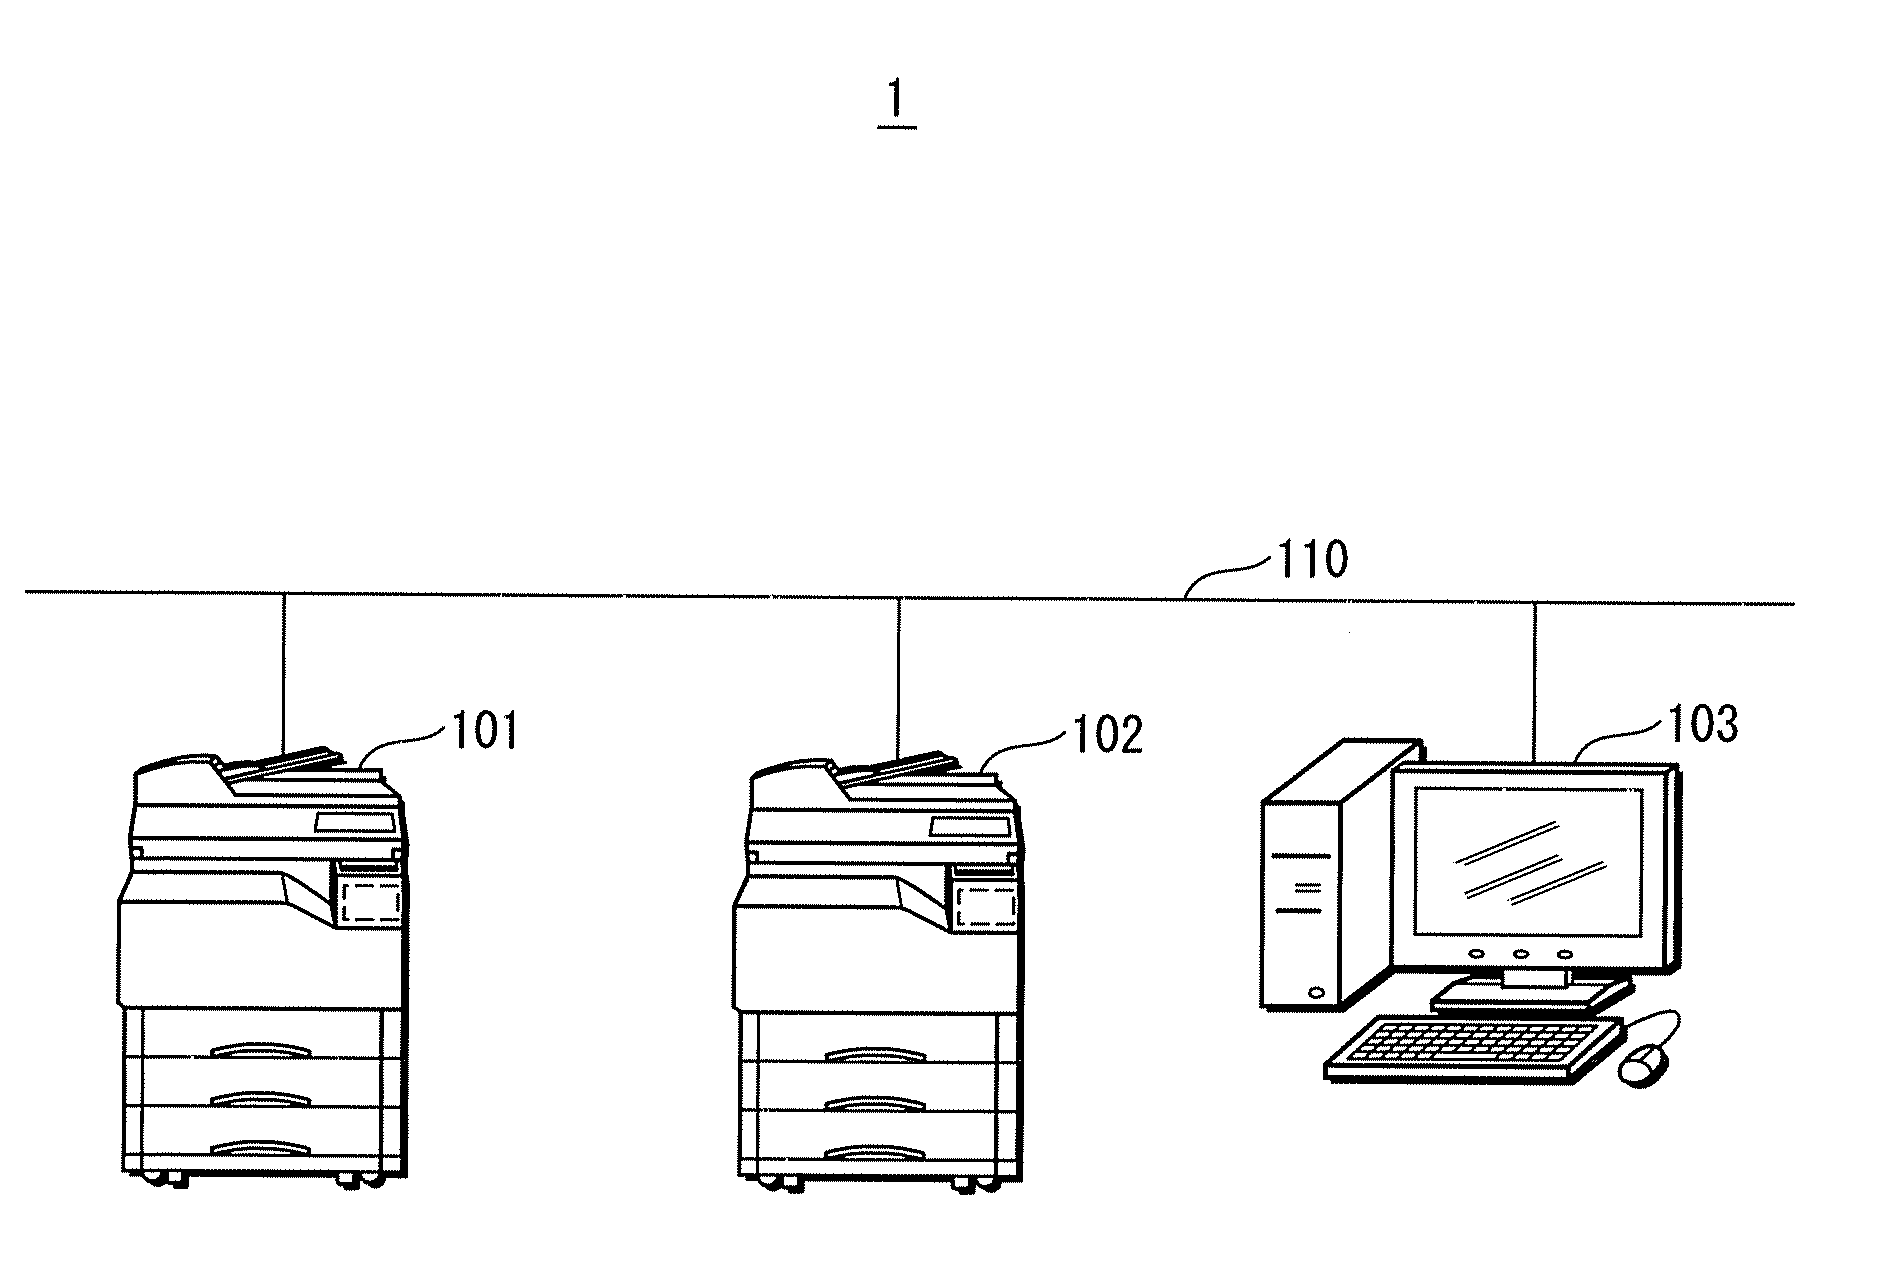 Image Processing System